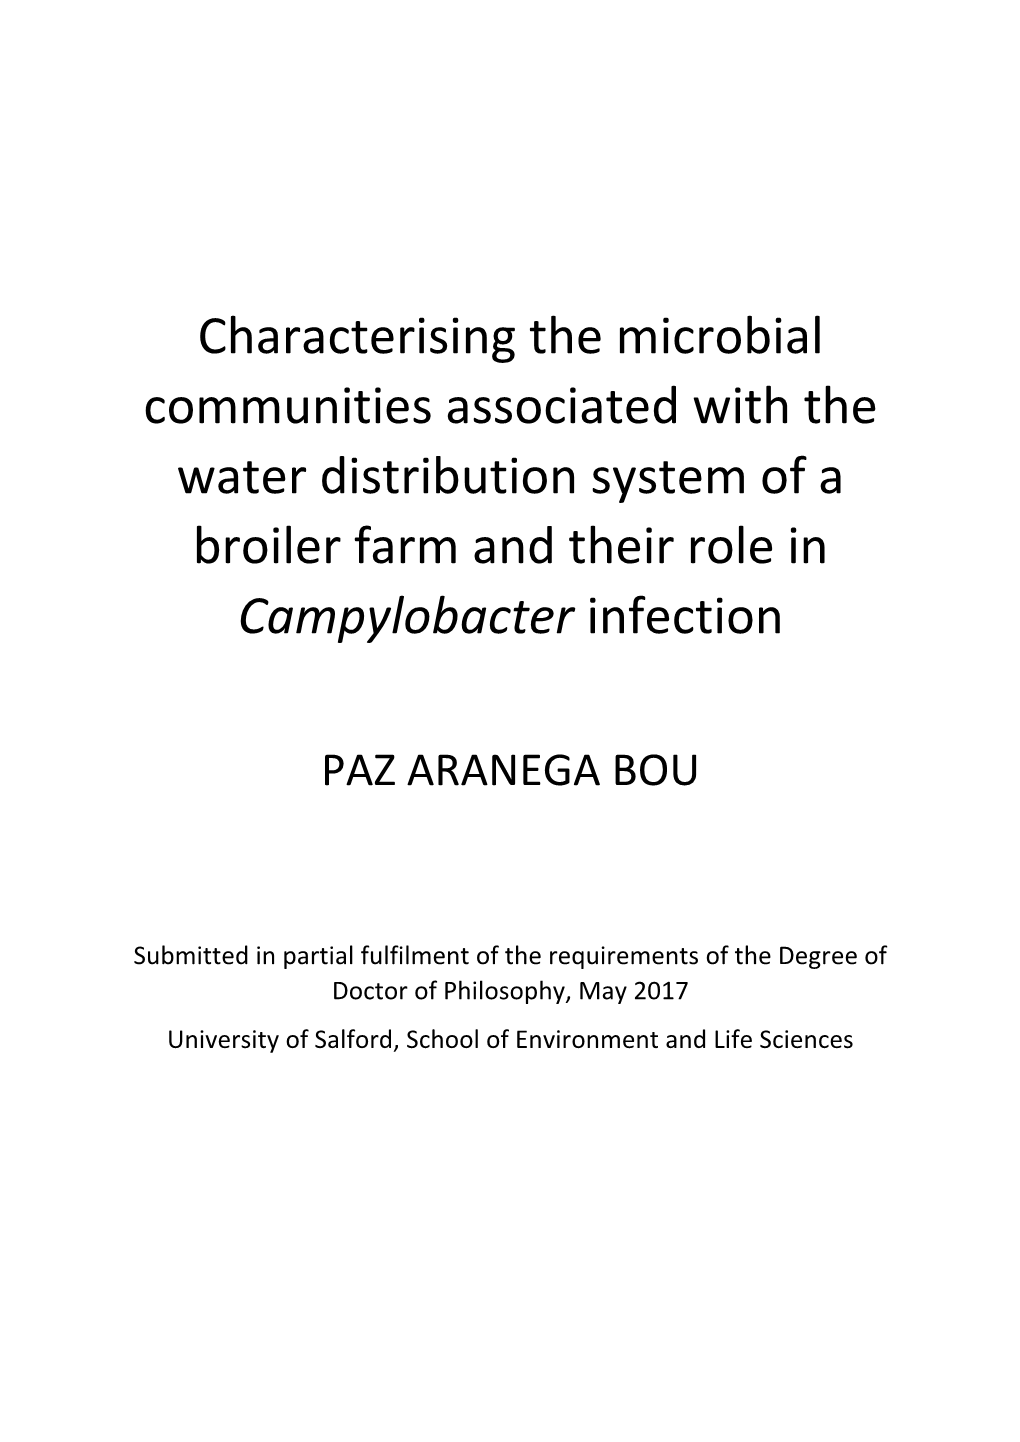 Characterising the Microbial Communities Associated with the Water Distribution System of a Broiler Farm and Their Role In